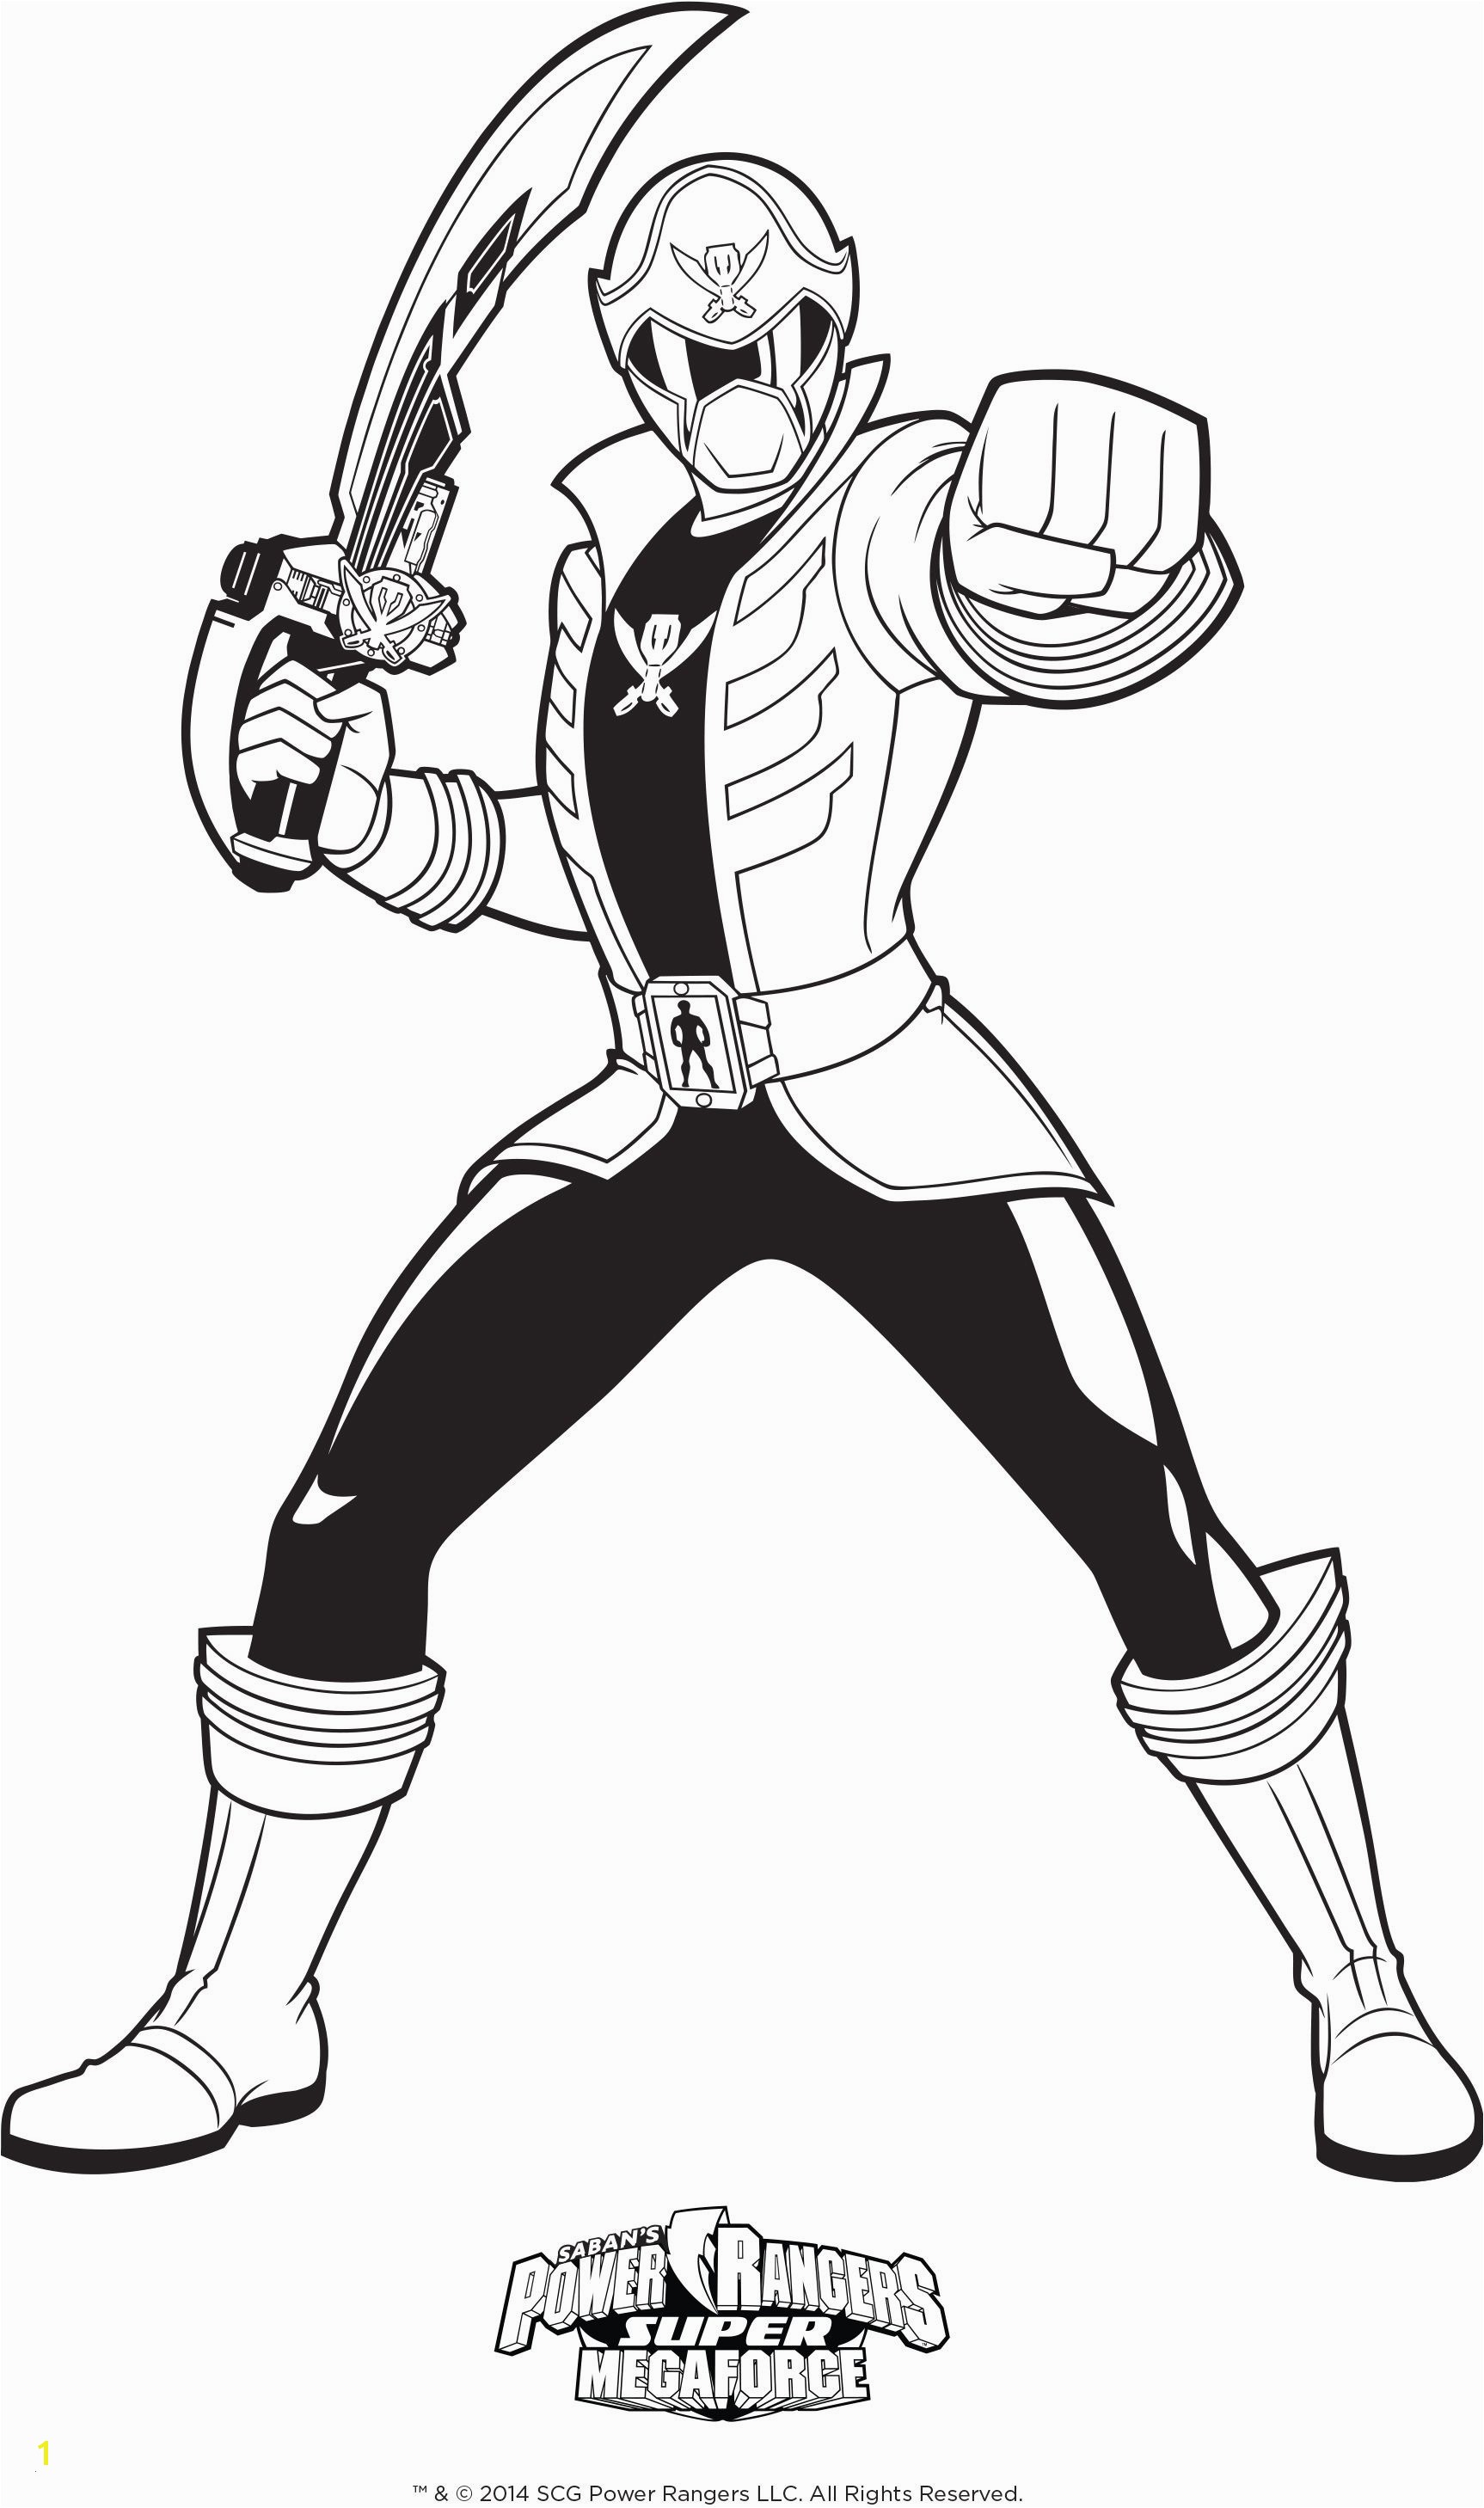 Green Power Ranger Coloring Pages Green Power Ranger Coloring Page Power Rangers Coloring Pages Nice